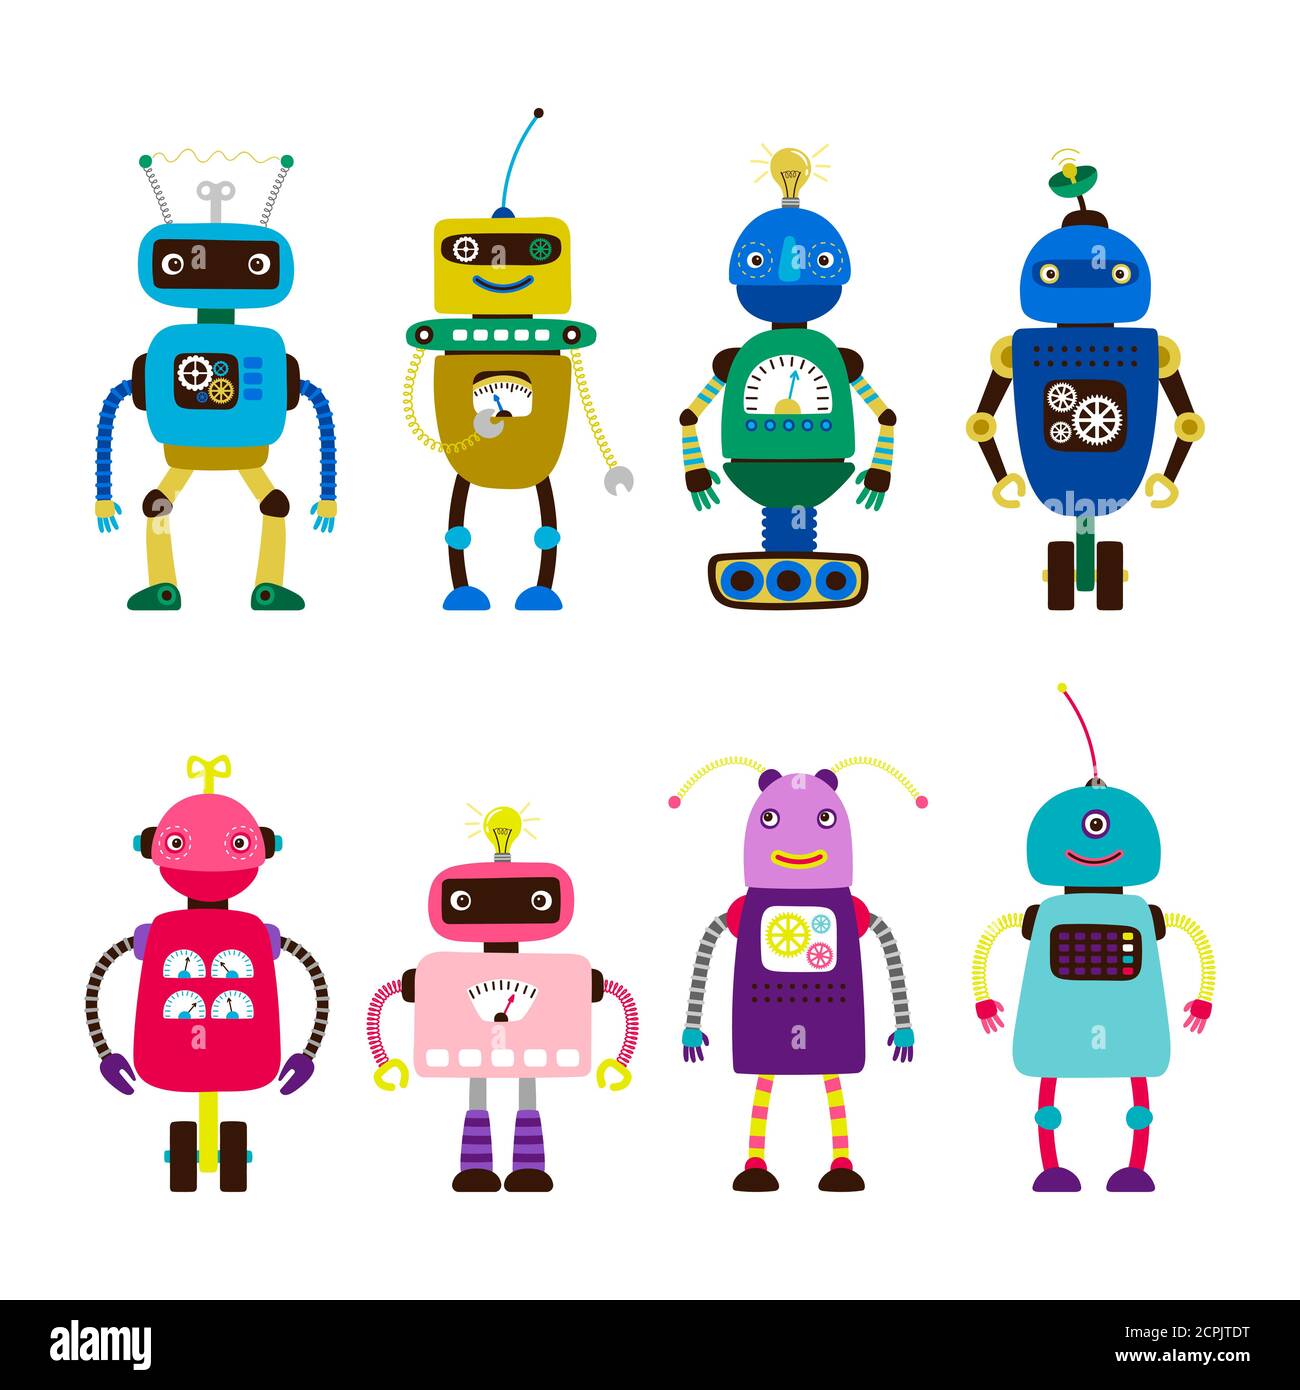 Robots for girls and boys vector isolated on white background. Robot girl toy, character robo boy electronic illustration Stock Vector